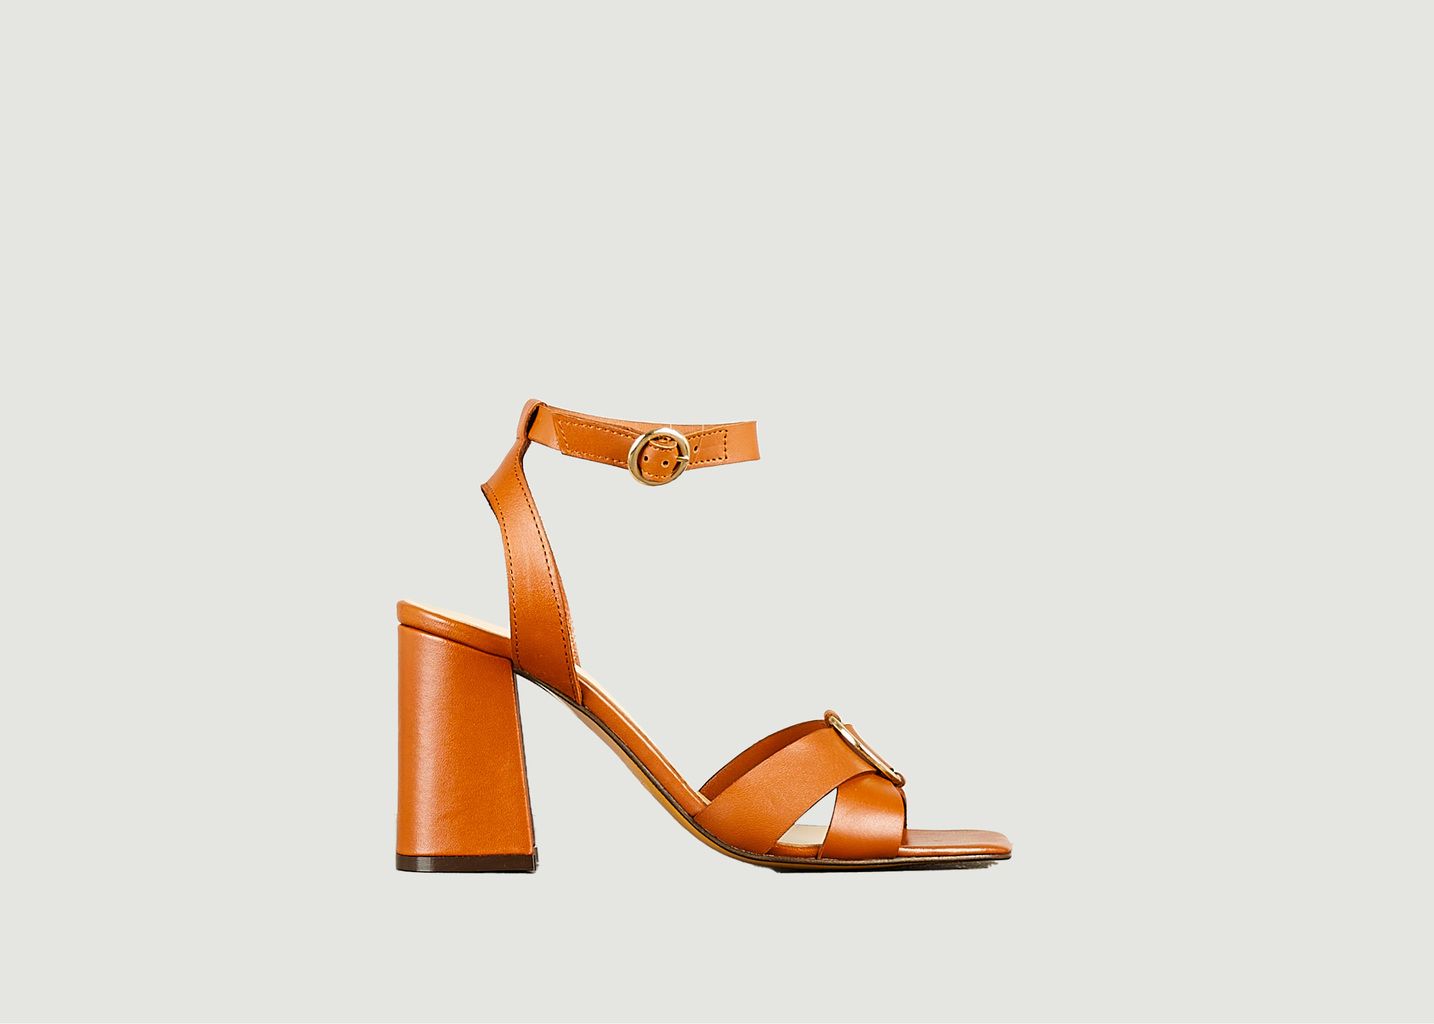 IO heel sandal in natural leather - Tila March